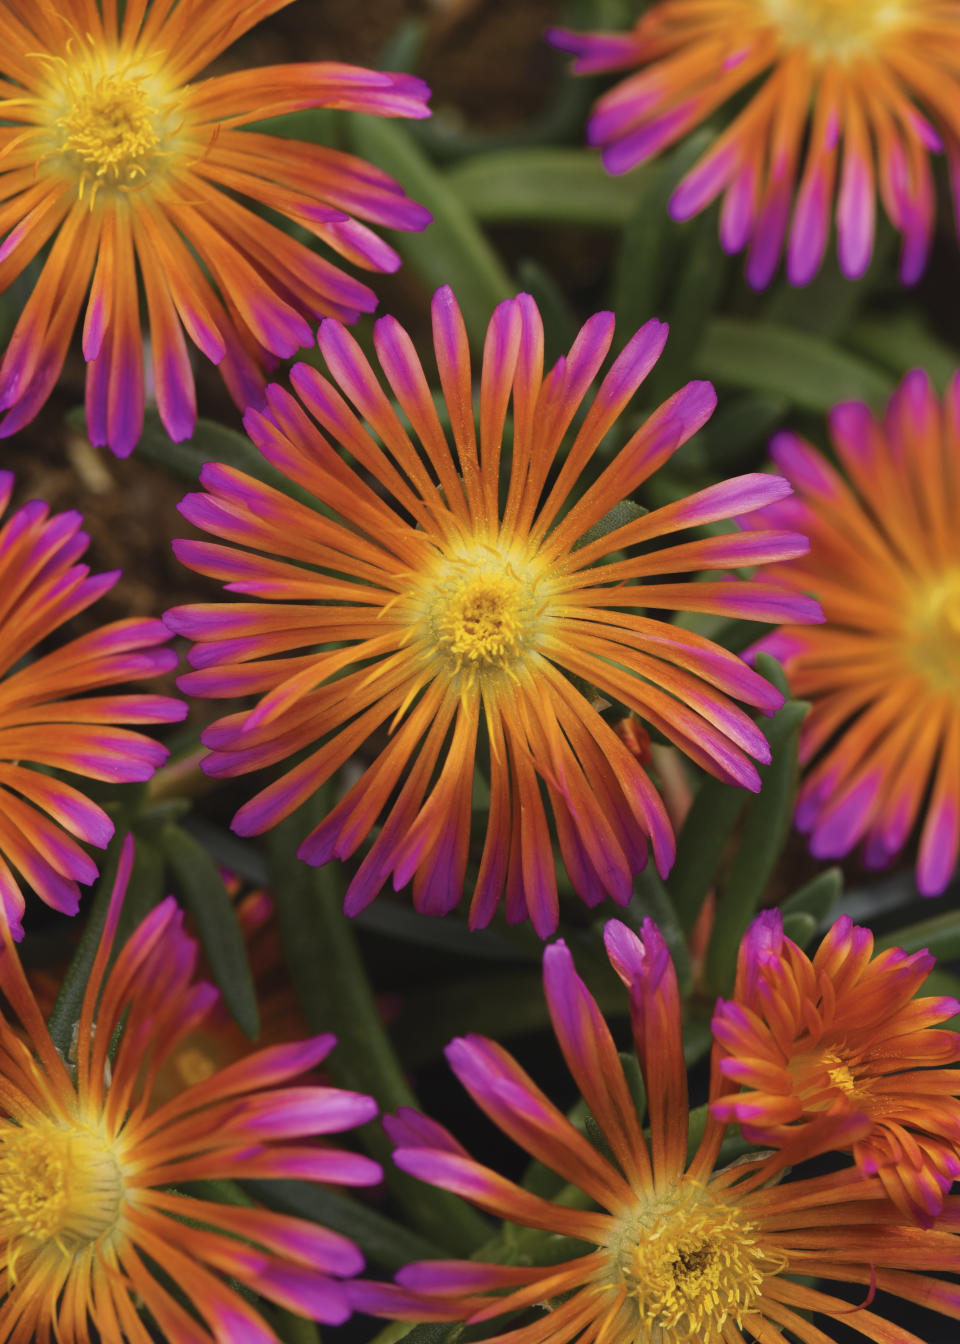 This image provided by Darwin Perennials shows Ocean Sunset Orange Glow ice plant flowers in bloom. (Darwin Perennials via AP)